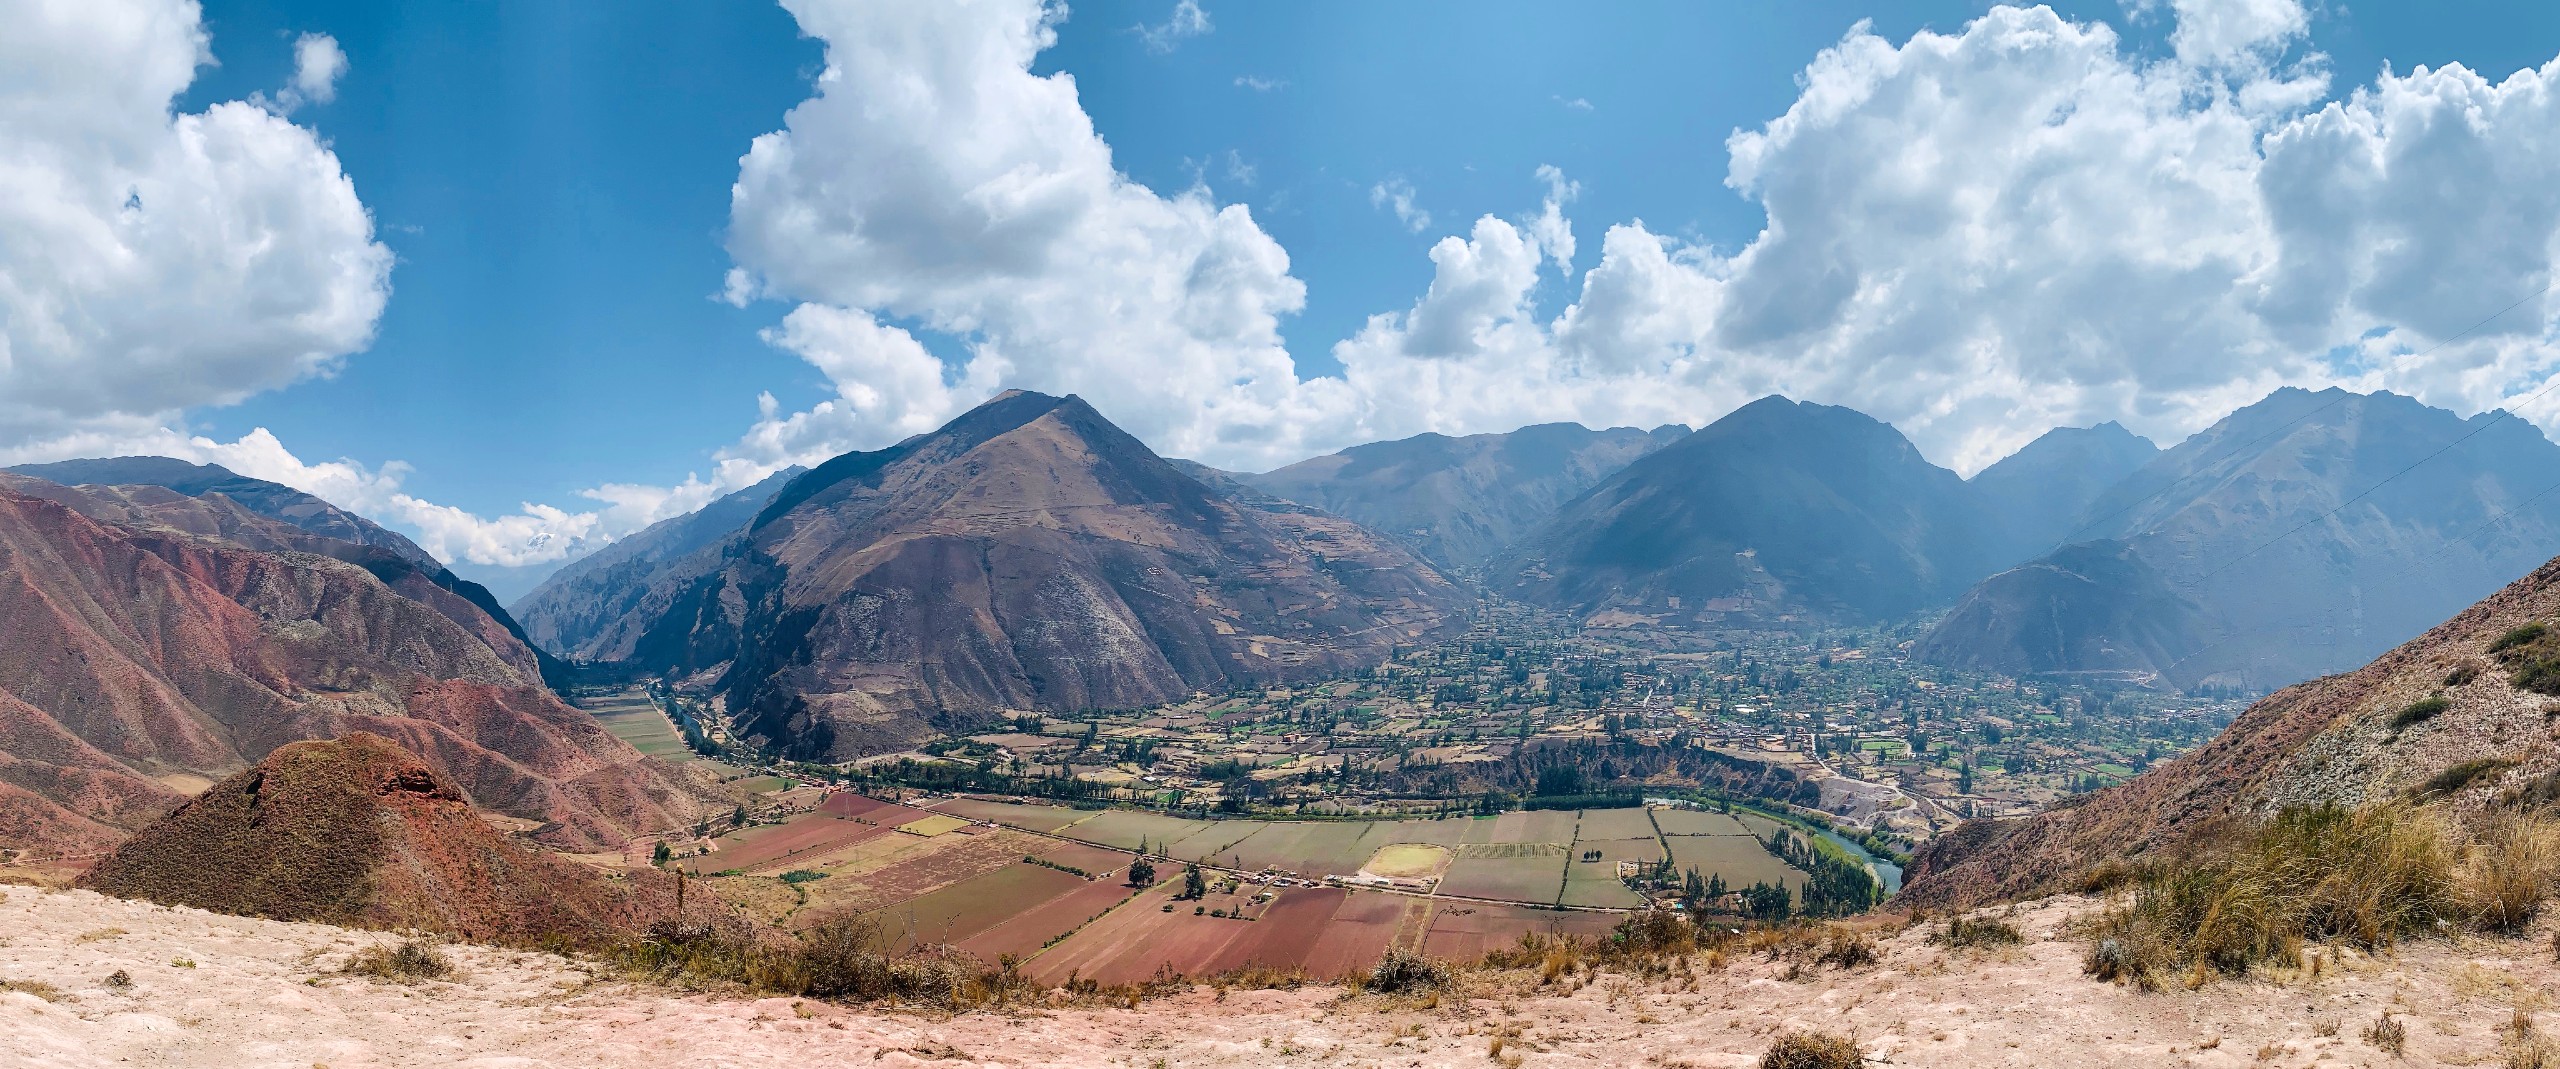 Machu Picchu and the Sacred Valley Tour